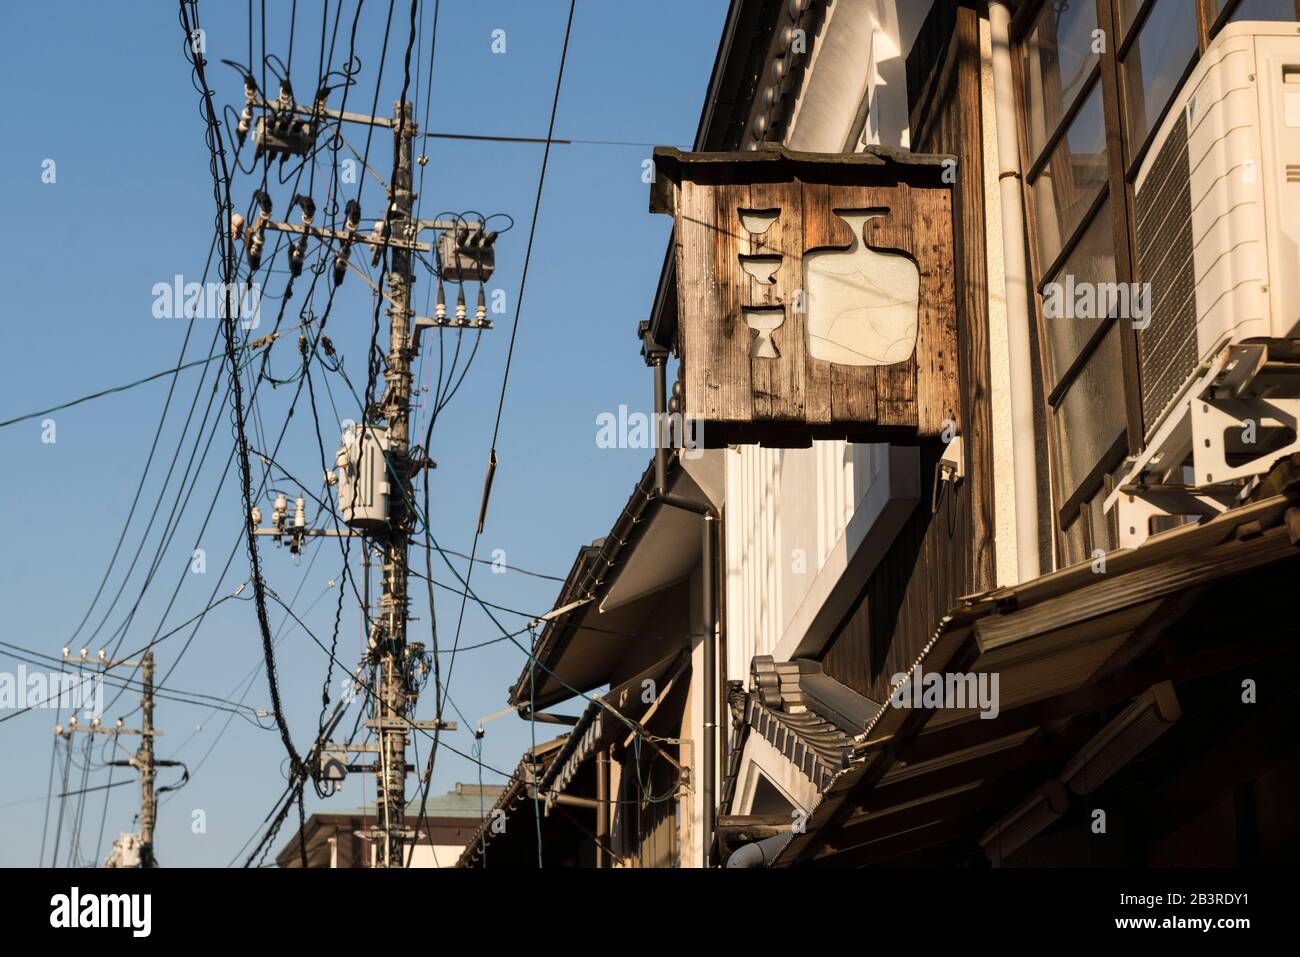 Street view with overhead power cables and wooden bar sign on Miyajima island, just outside Hiroshima, Japan Stock Photo